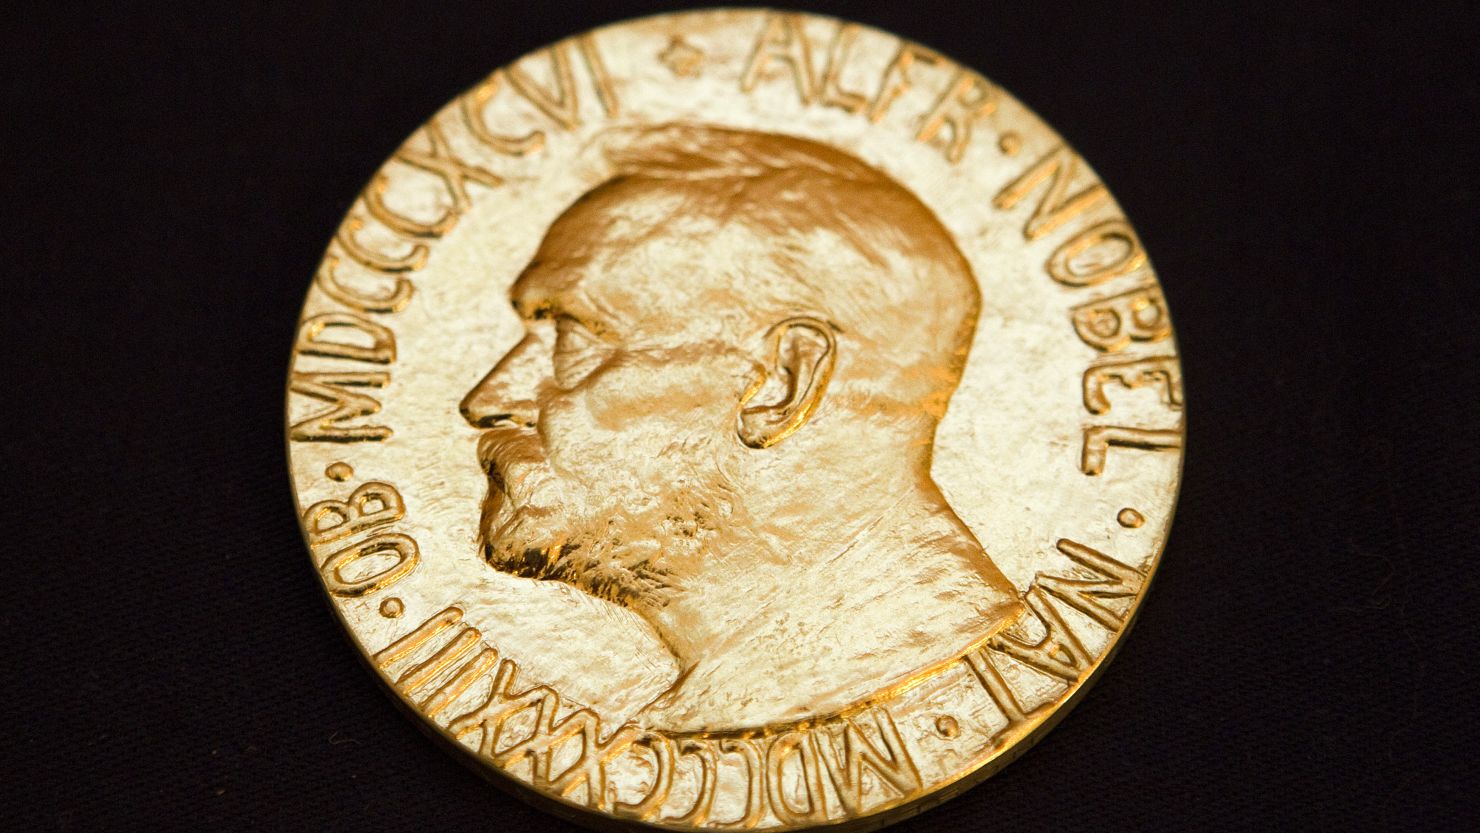 The Nobel Peace Prize medal